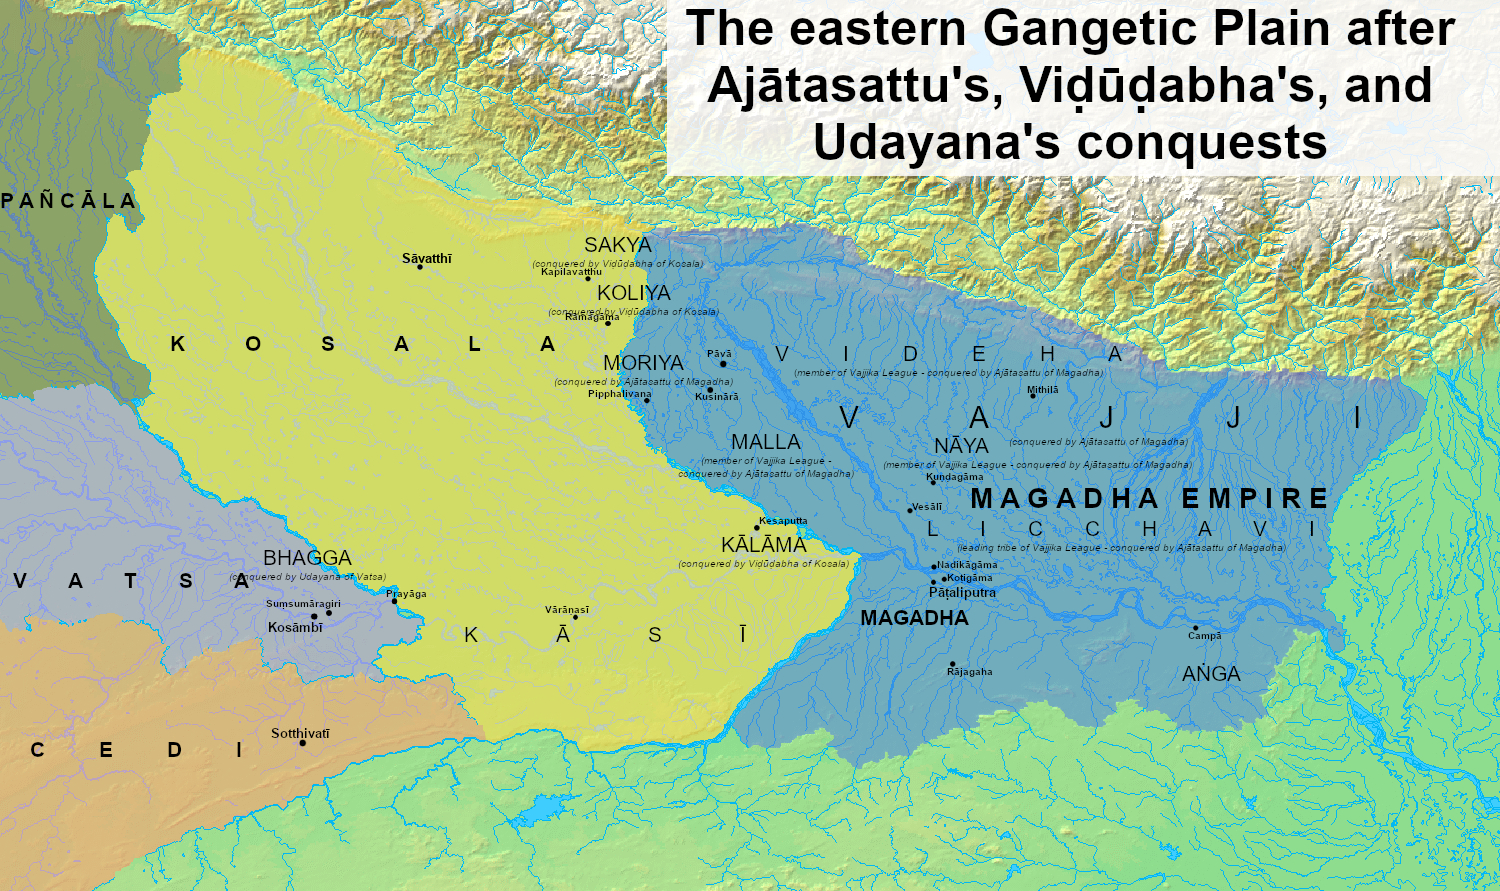 The_eastern_Gangetic_plain_after_Ajatasattu's,_Vidudabha's_and_Udayana's_conquests.jpg